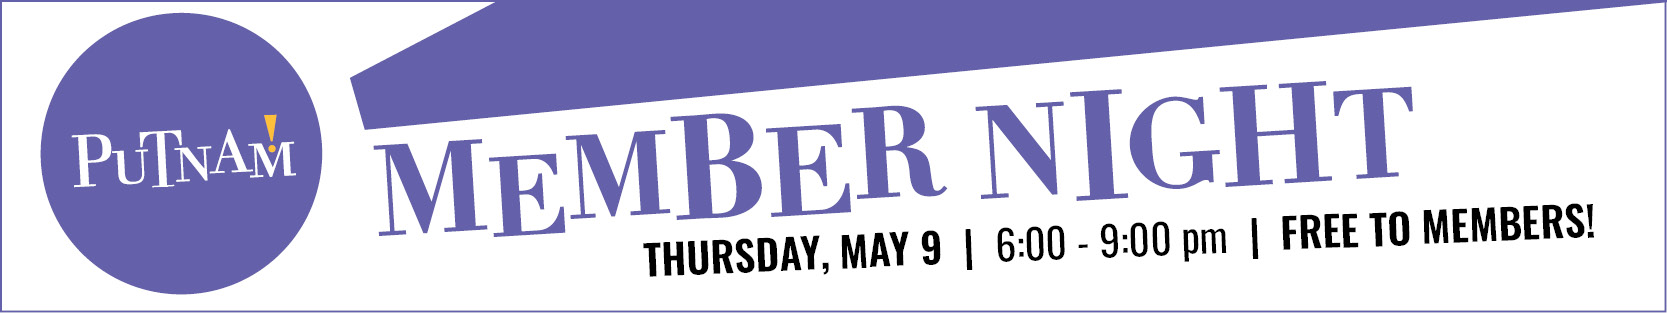 Member Night Thursday, May 9th from 6 - 9 pm at the Putnam Museum in Davenport, IA.